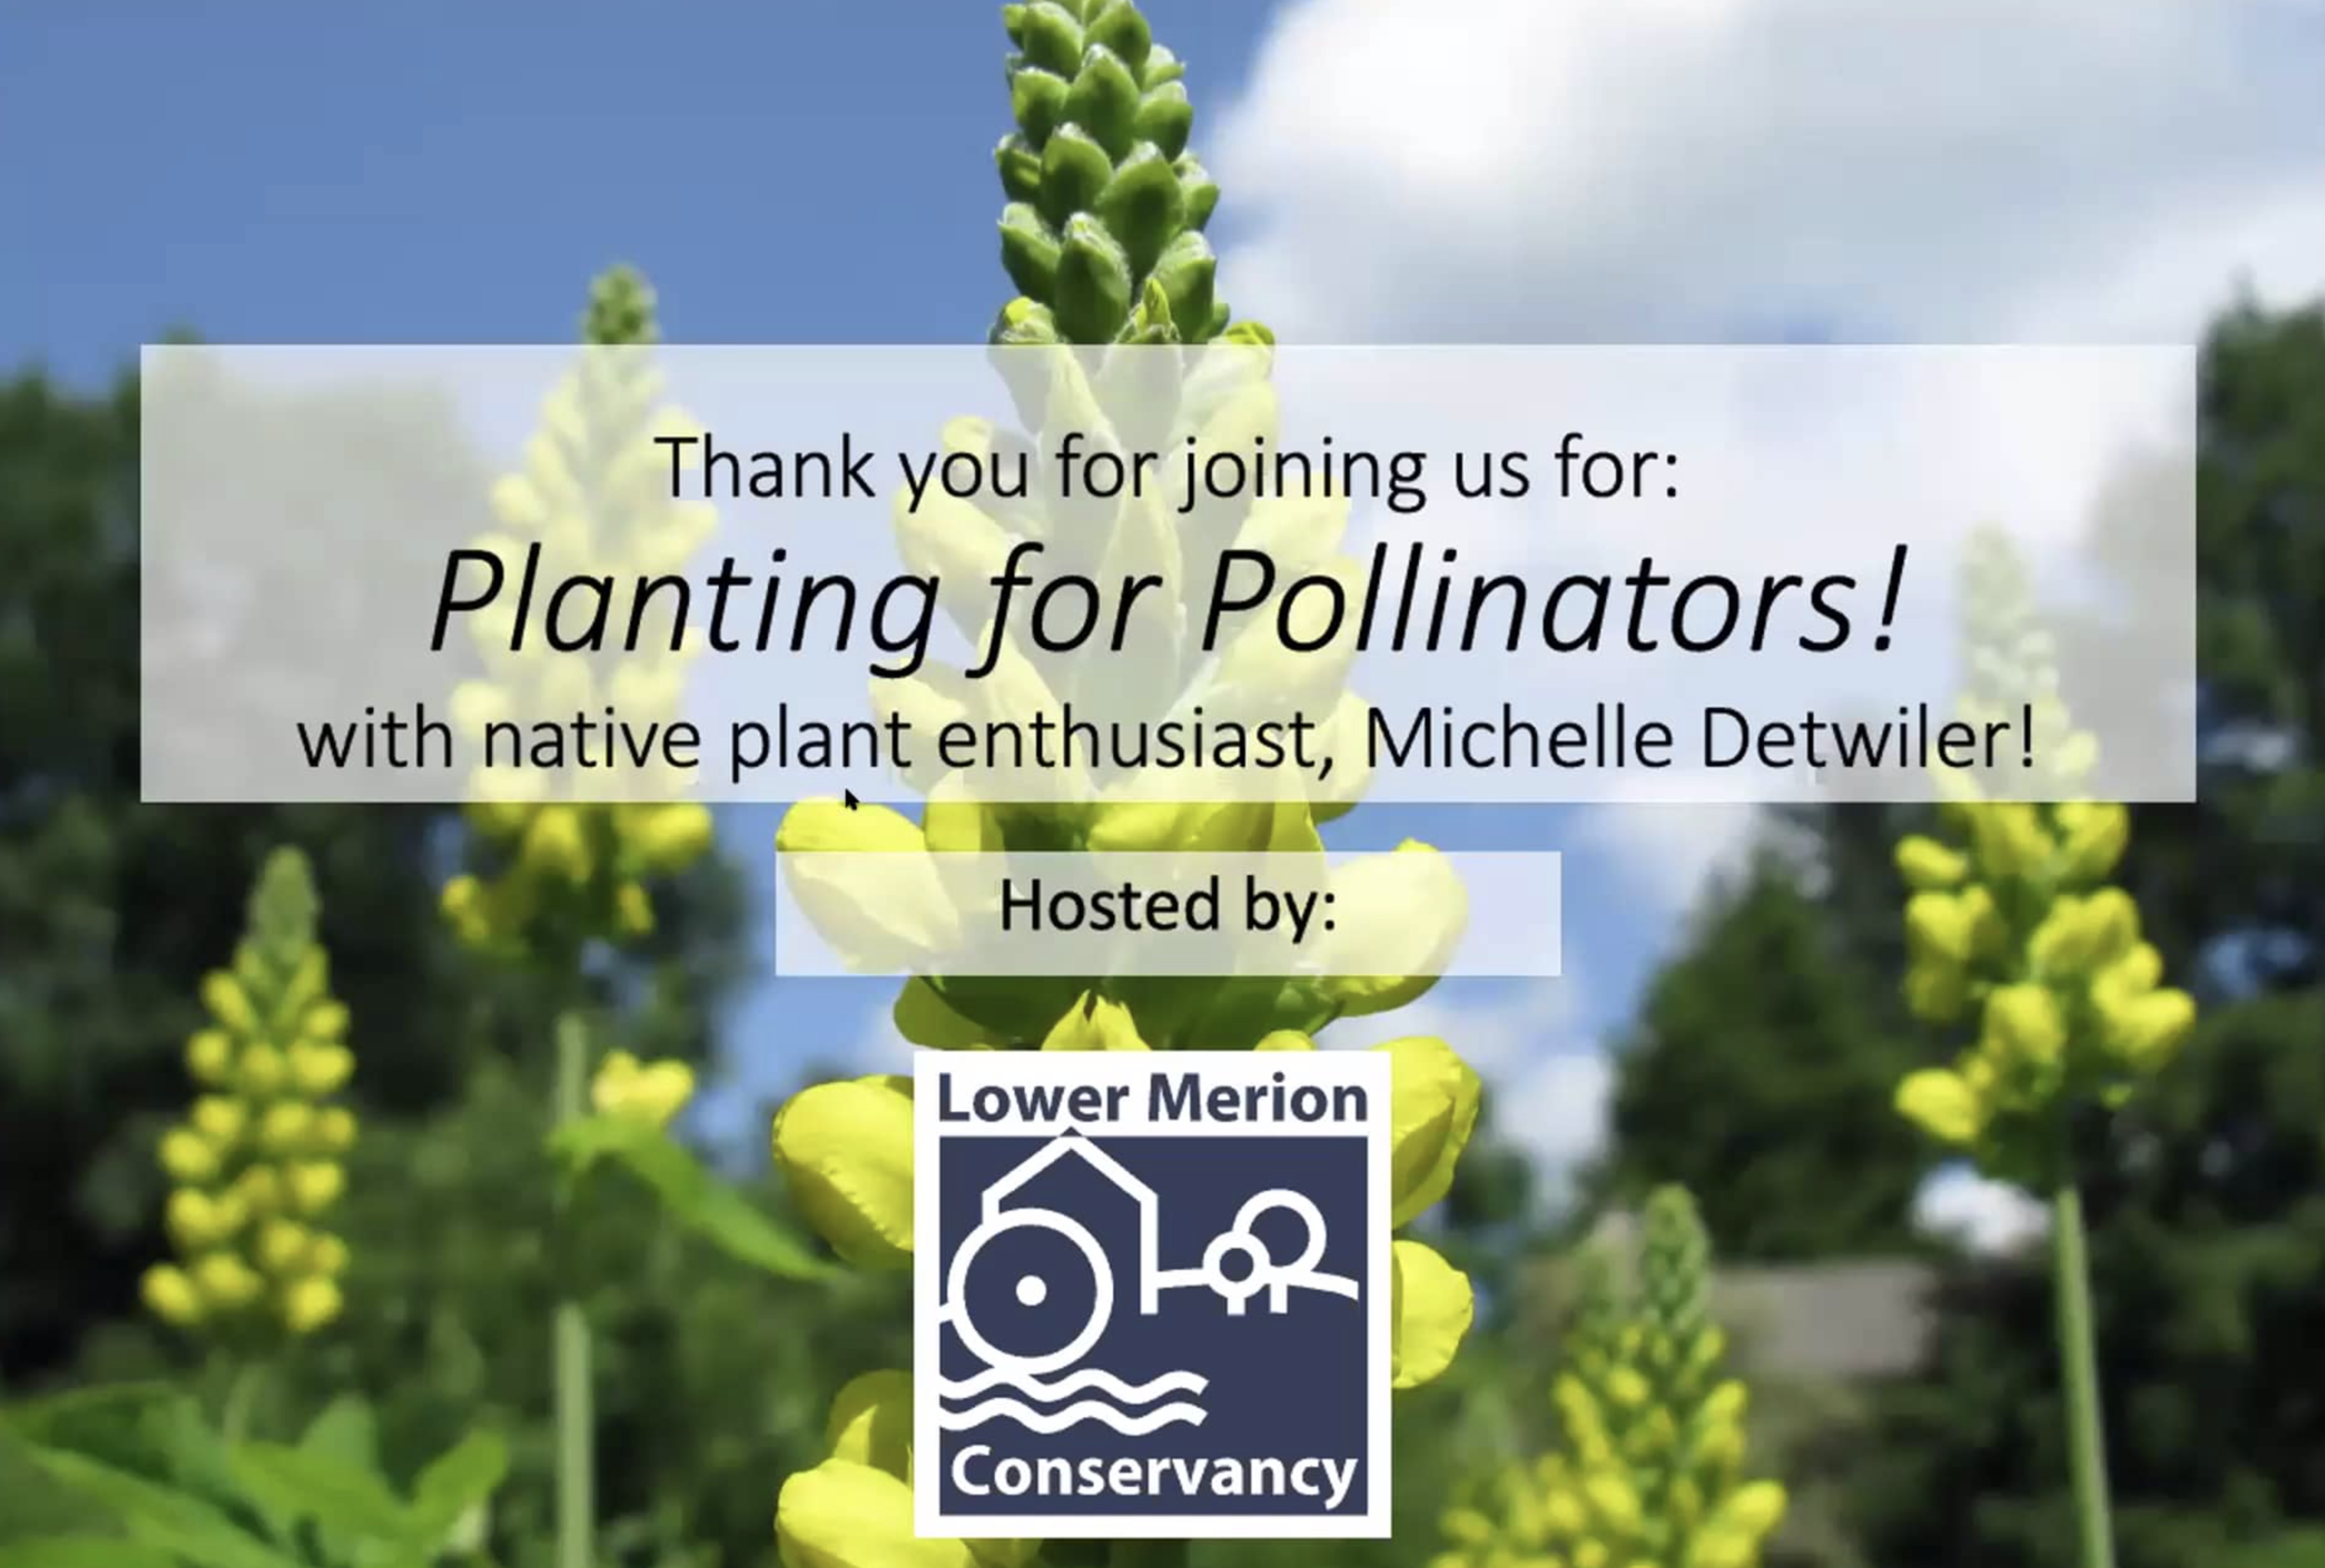 View my talk about Planting for Pollinators here (22 April 2020).  The talk starts at minute 16:40.